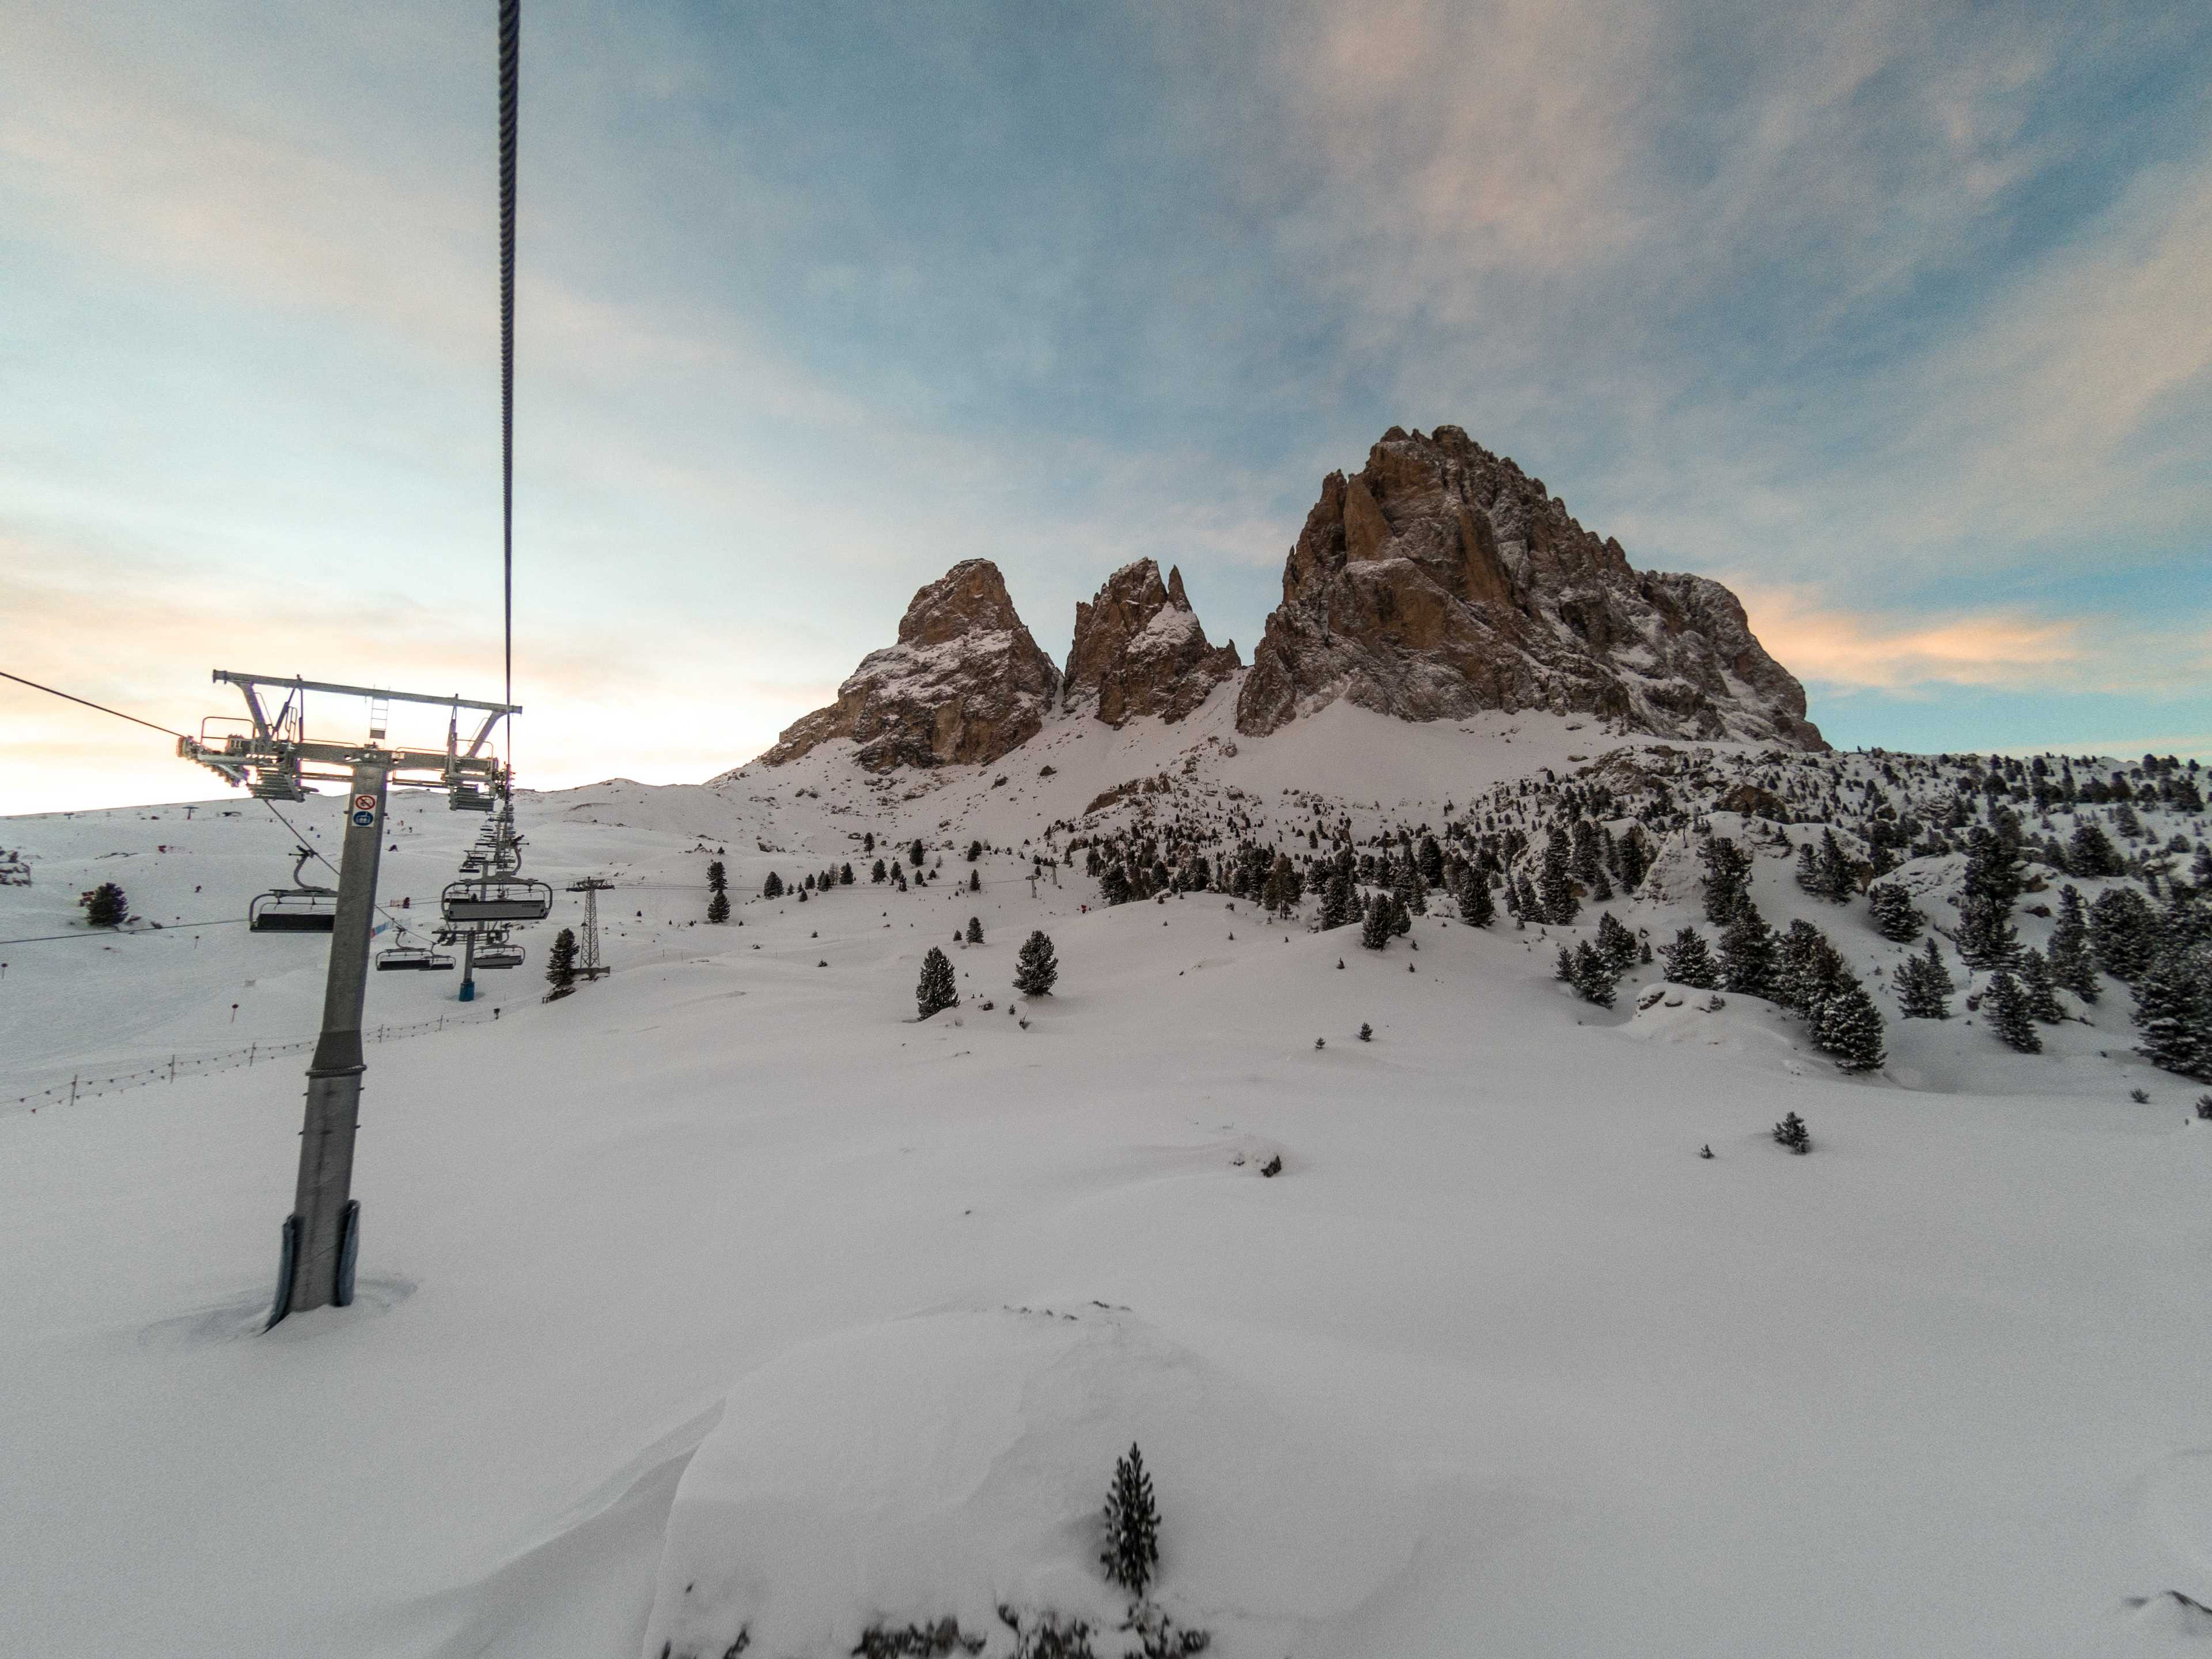 On my way to Val di Fassa, Salei chairlift, Val Gardena